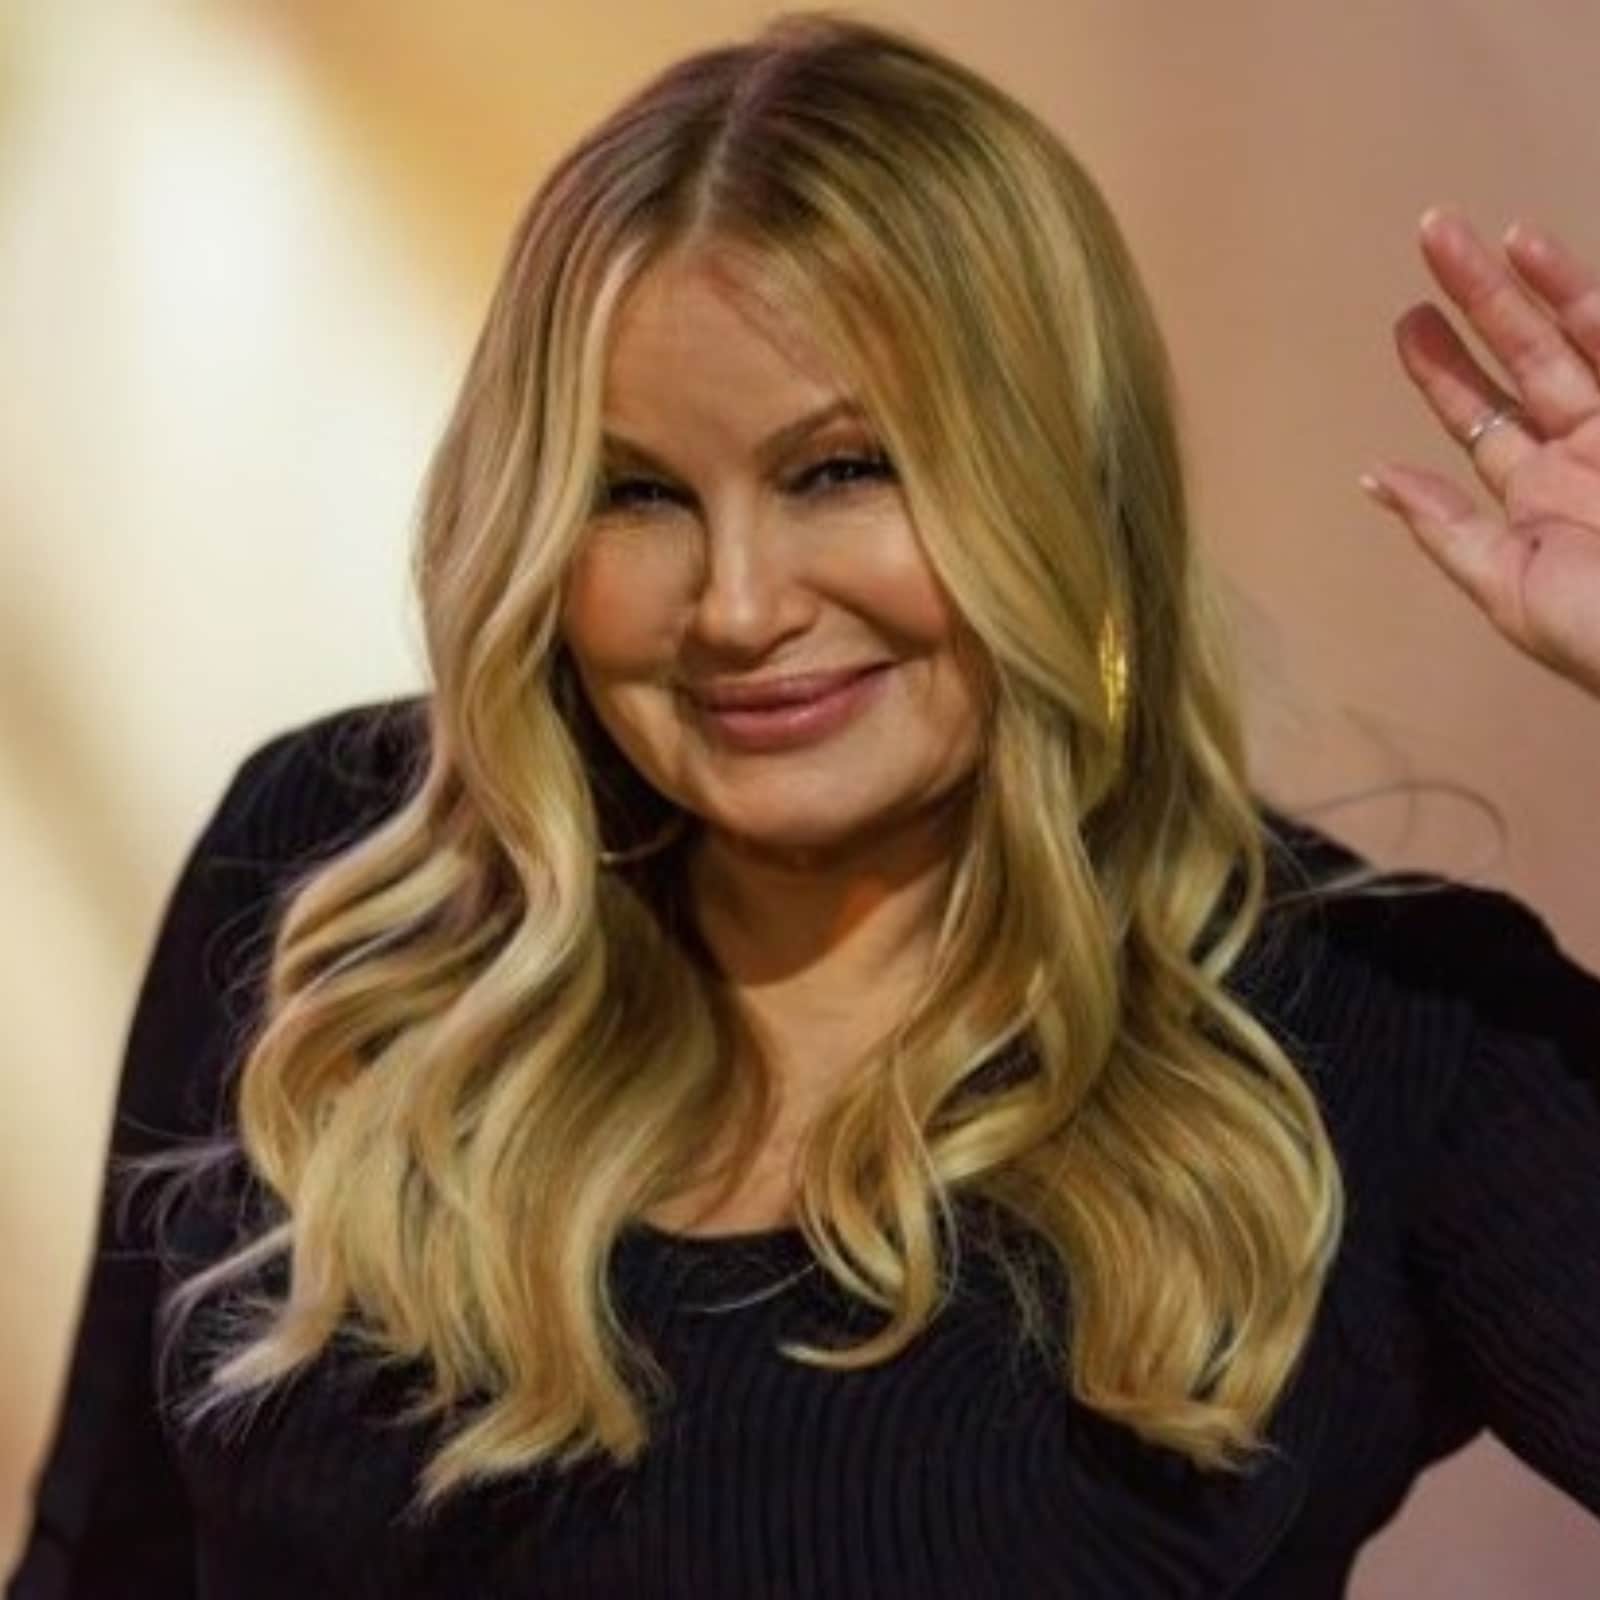 Free Telugu Mom Son Sleeping Sex Videos - Jennifer Coolidge Admits To Sleeping With 200 People After American Pie:  'Got Lots Of Sexual Action'